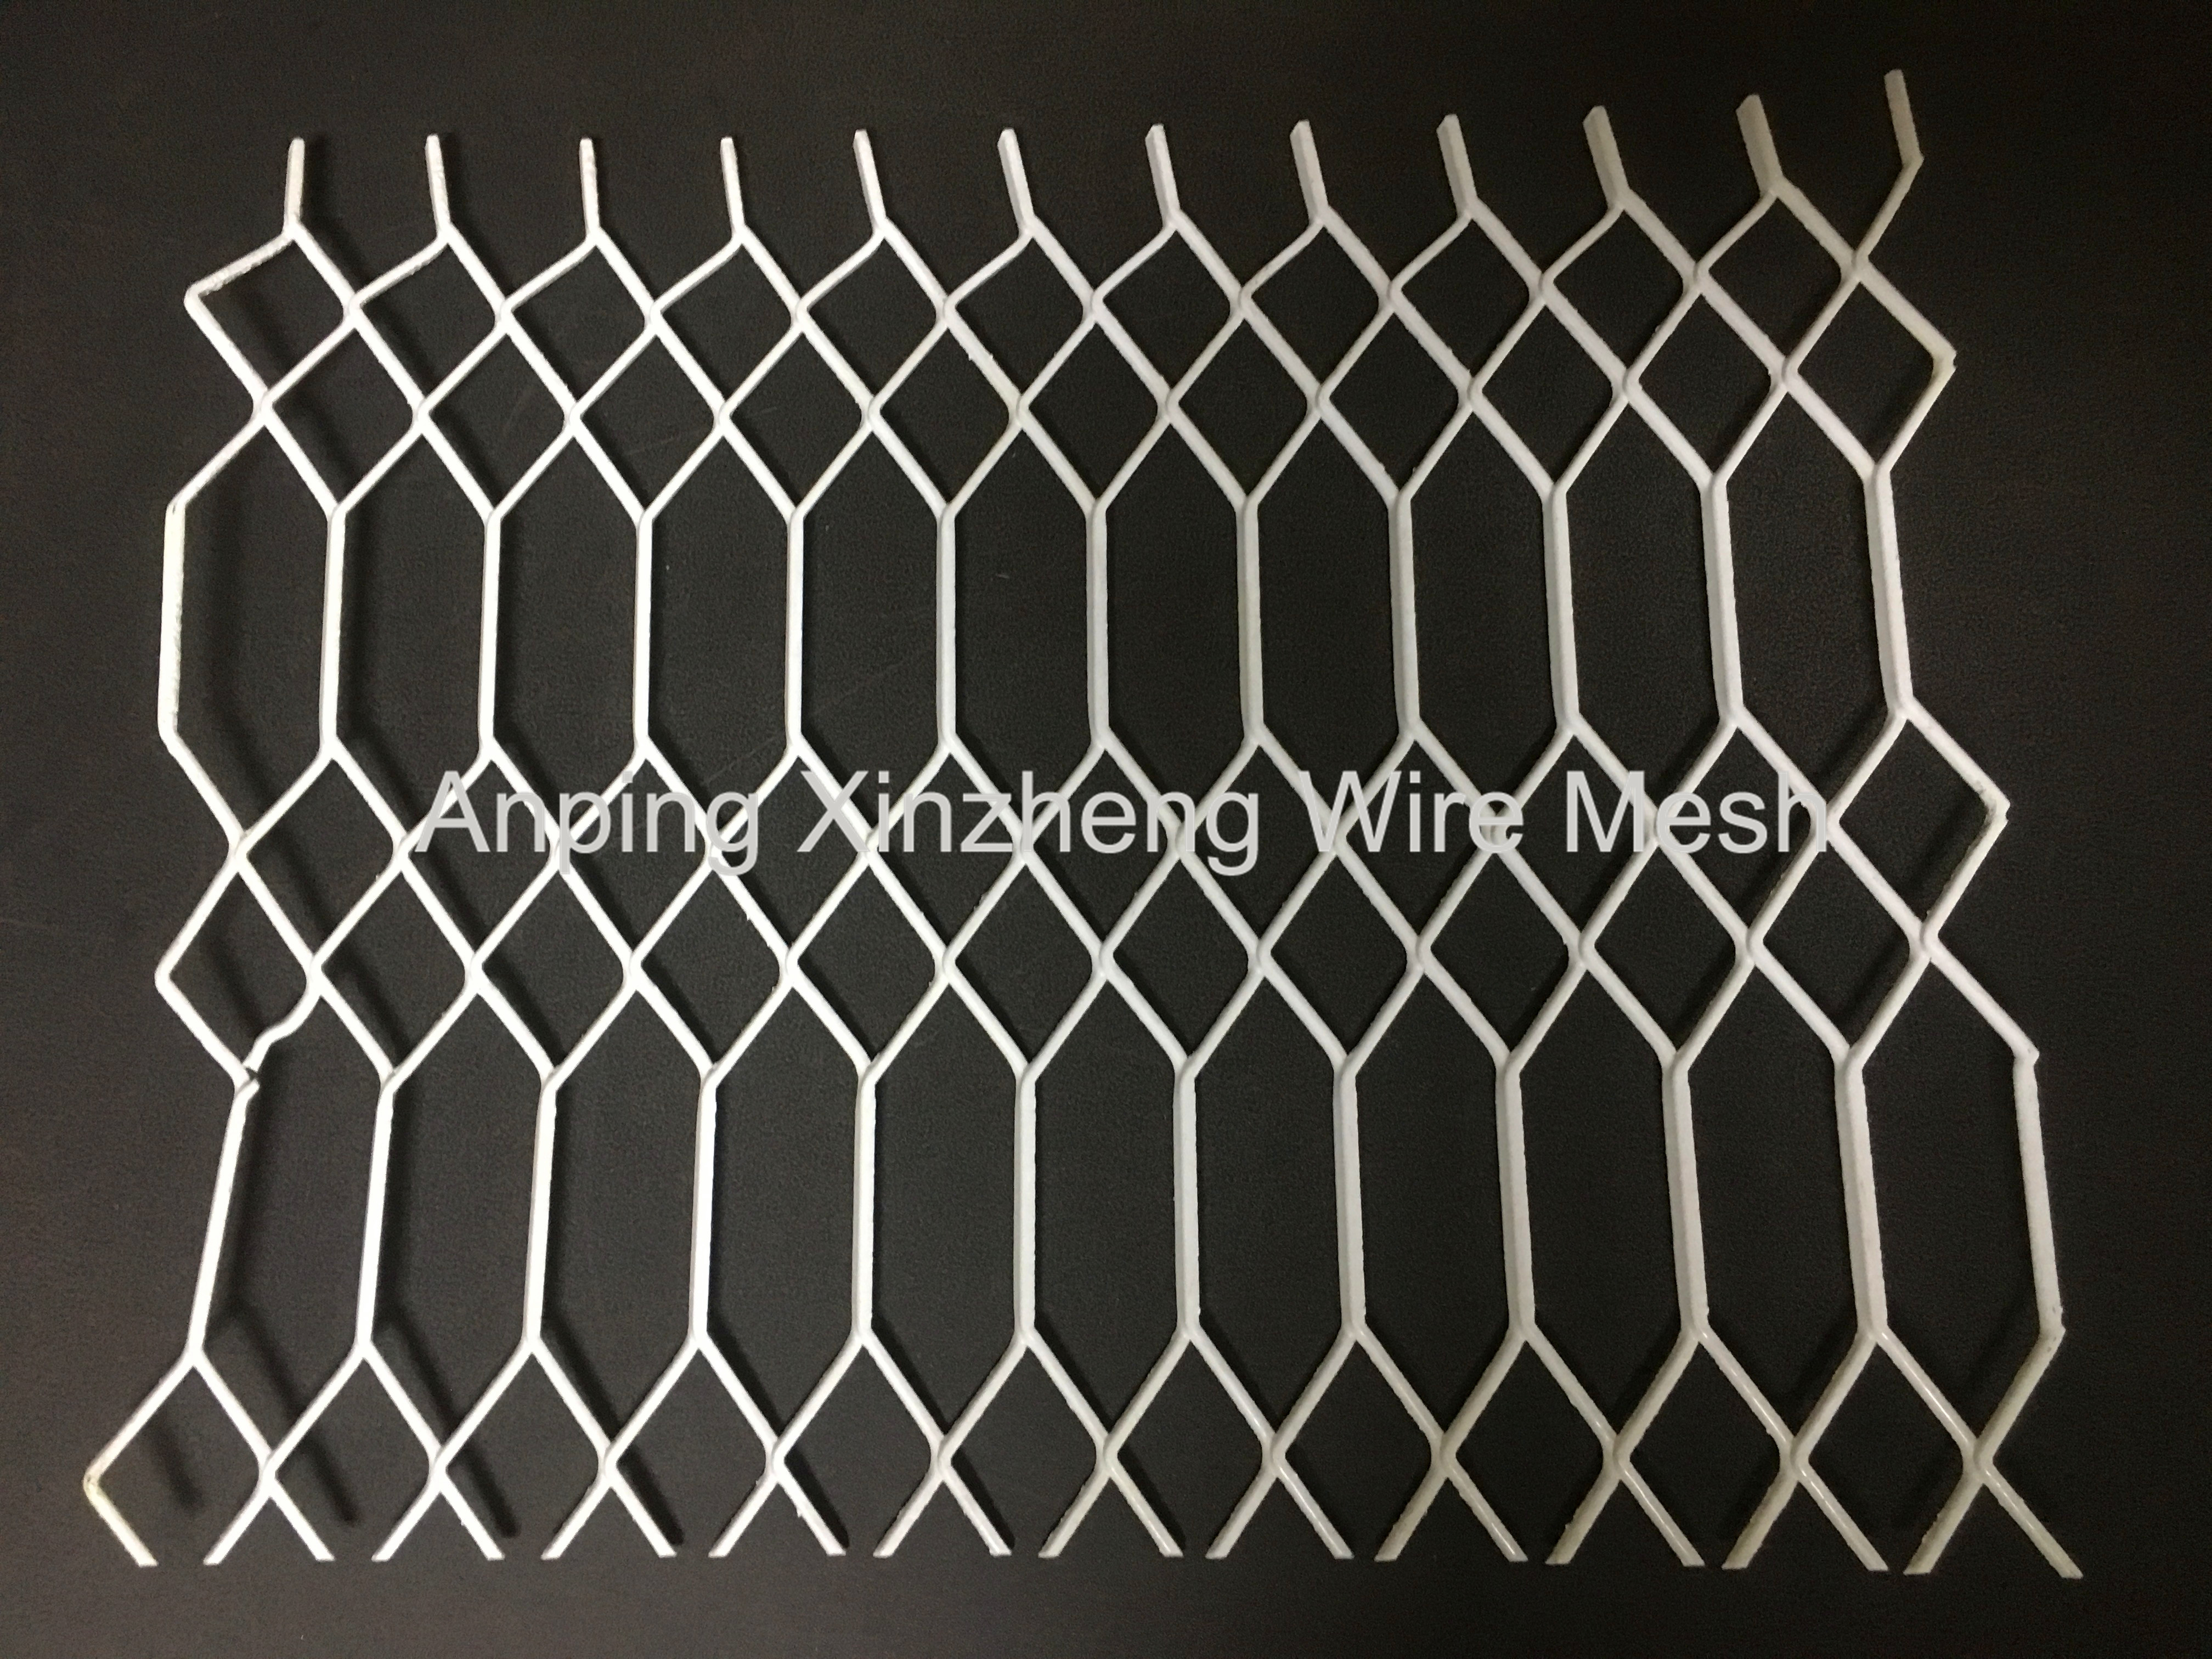 Stainless Steel Plate Mesh